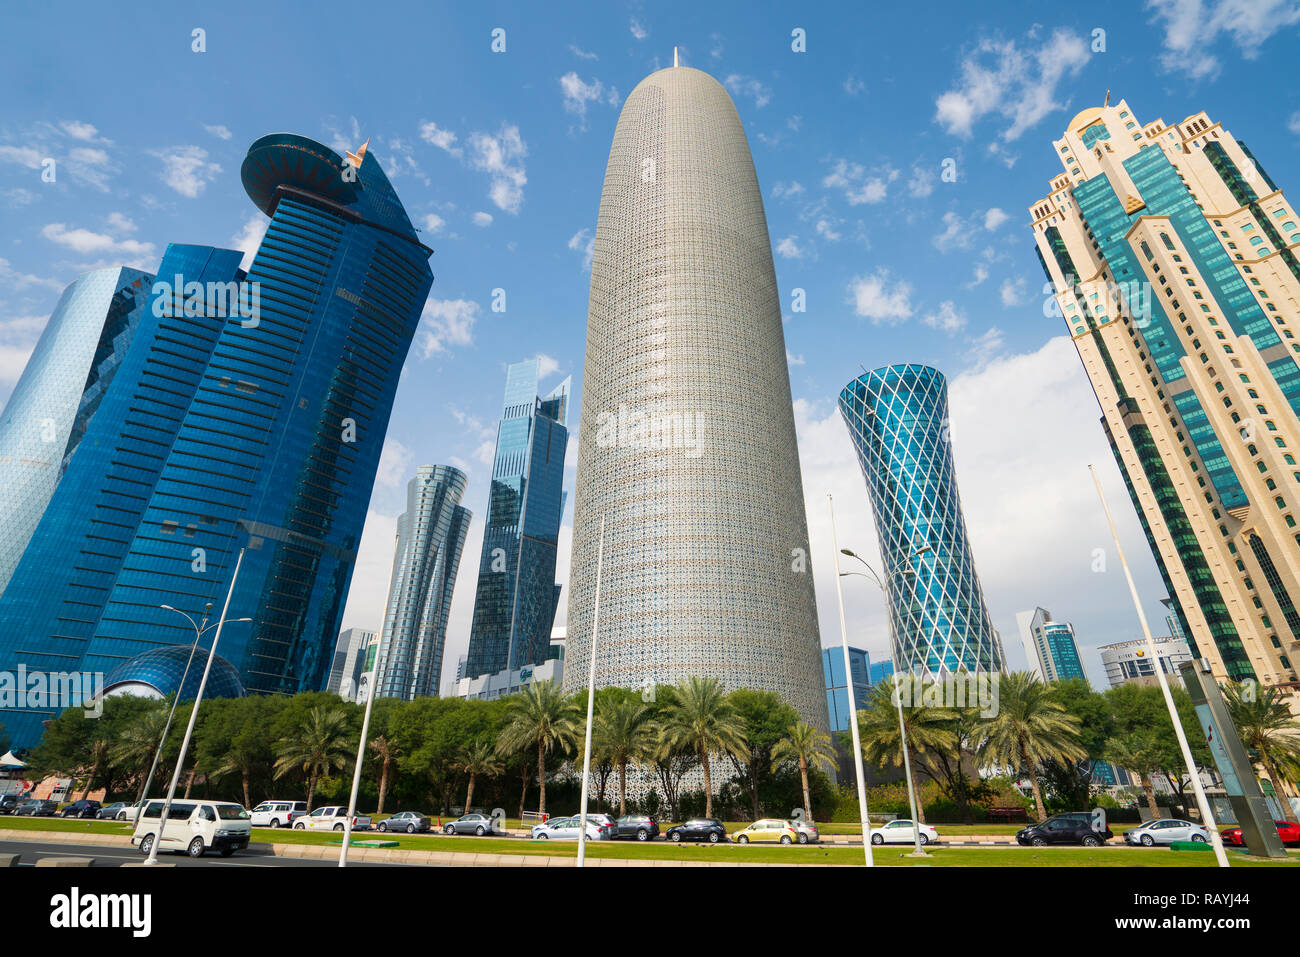 Daytime Skyline view of West Bay business district in Doha, Qatar Stock Photo